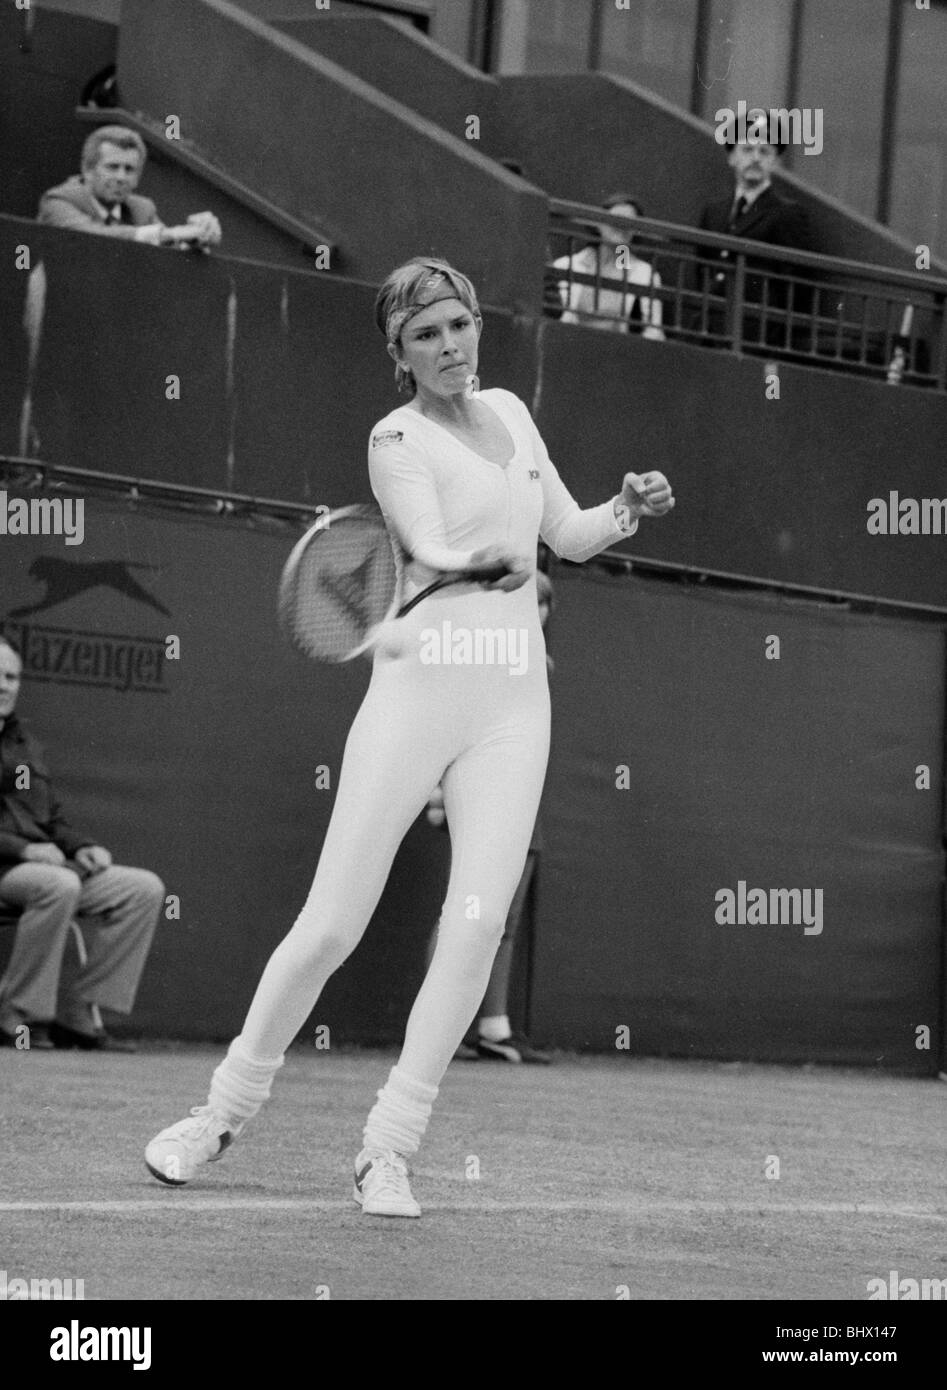 American tennis player Anne White in action wearing her white skin tight  catsuit during her Ladies Singles match against Pam Stock Photo - Alamy